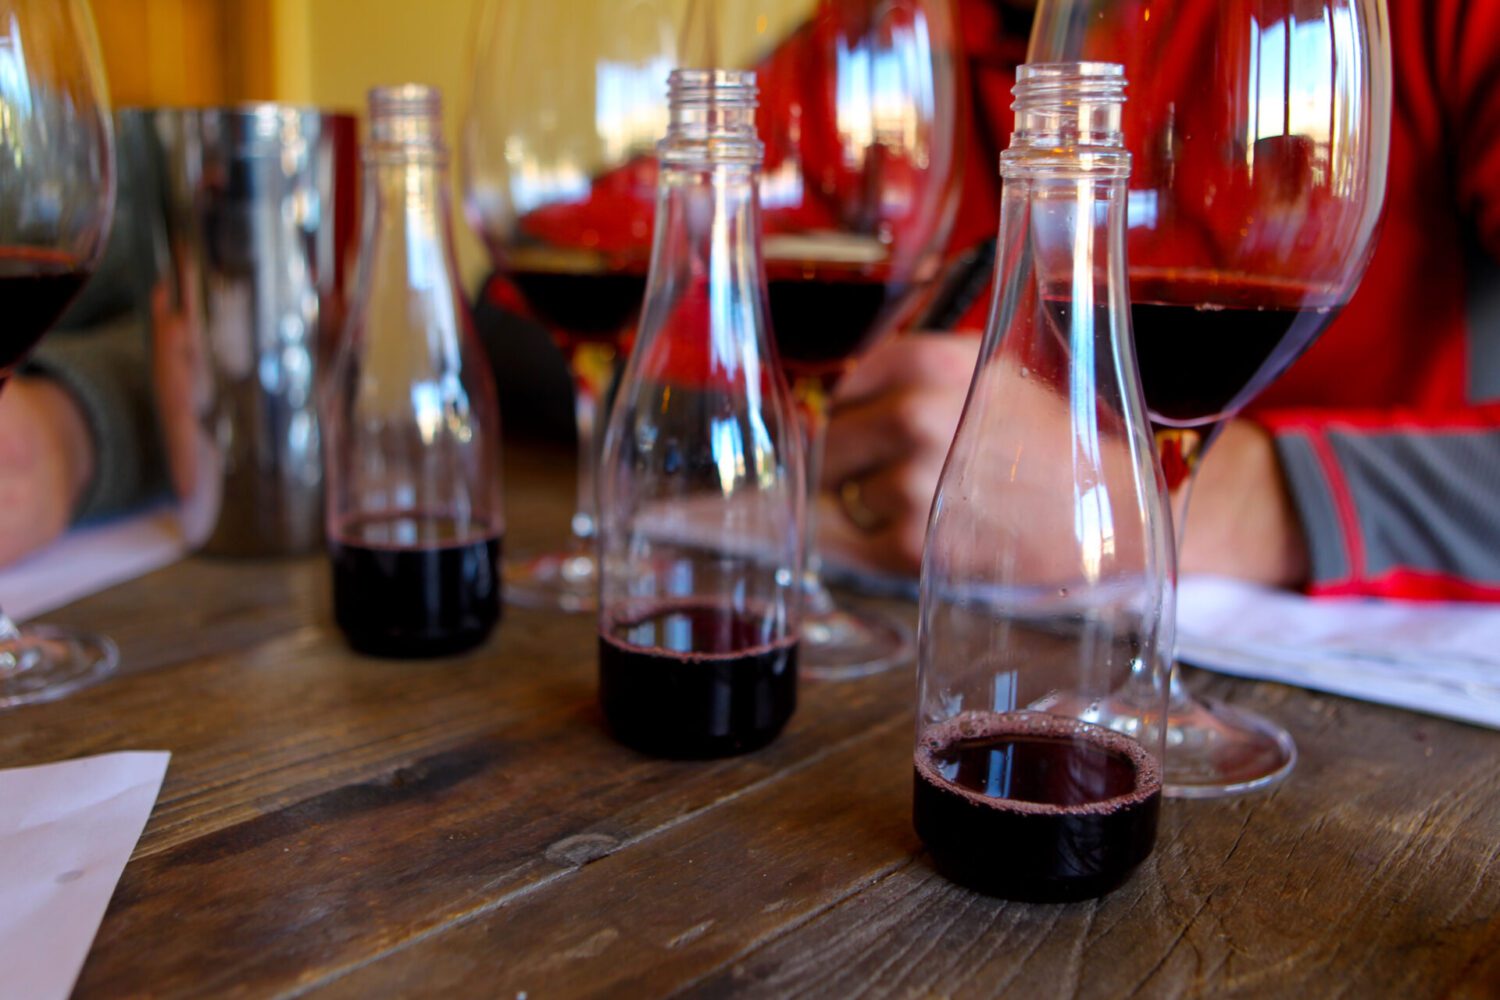 small bottles of wine are lined up and blind tasted in a blending trial